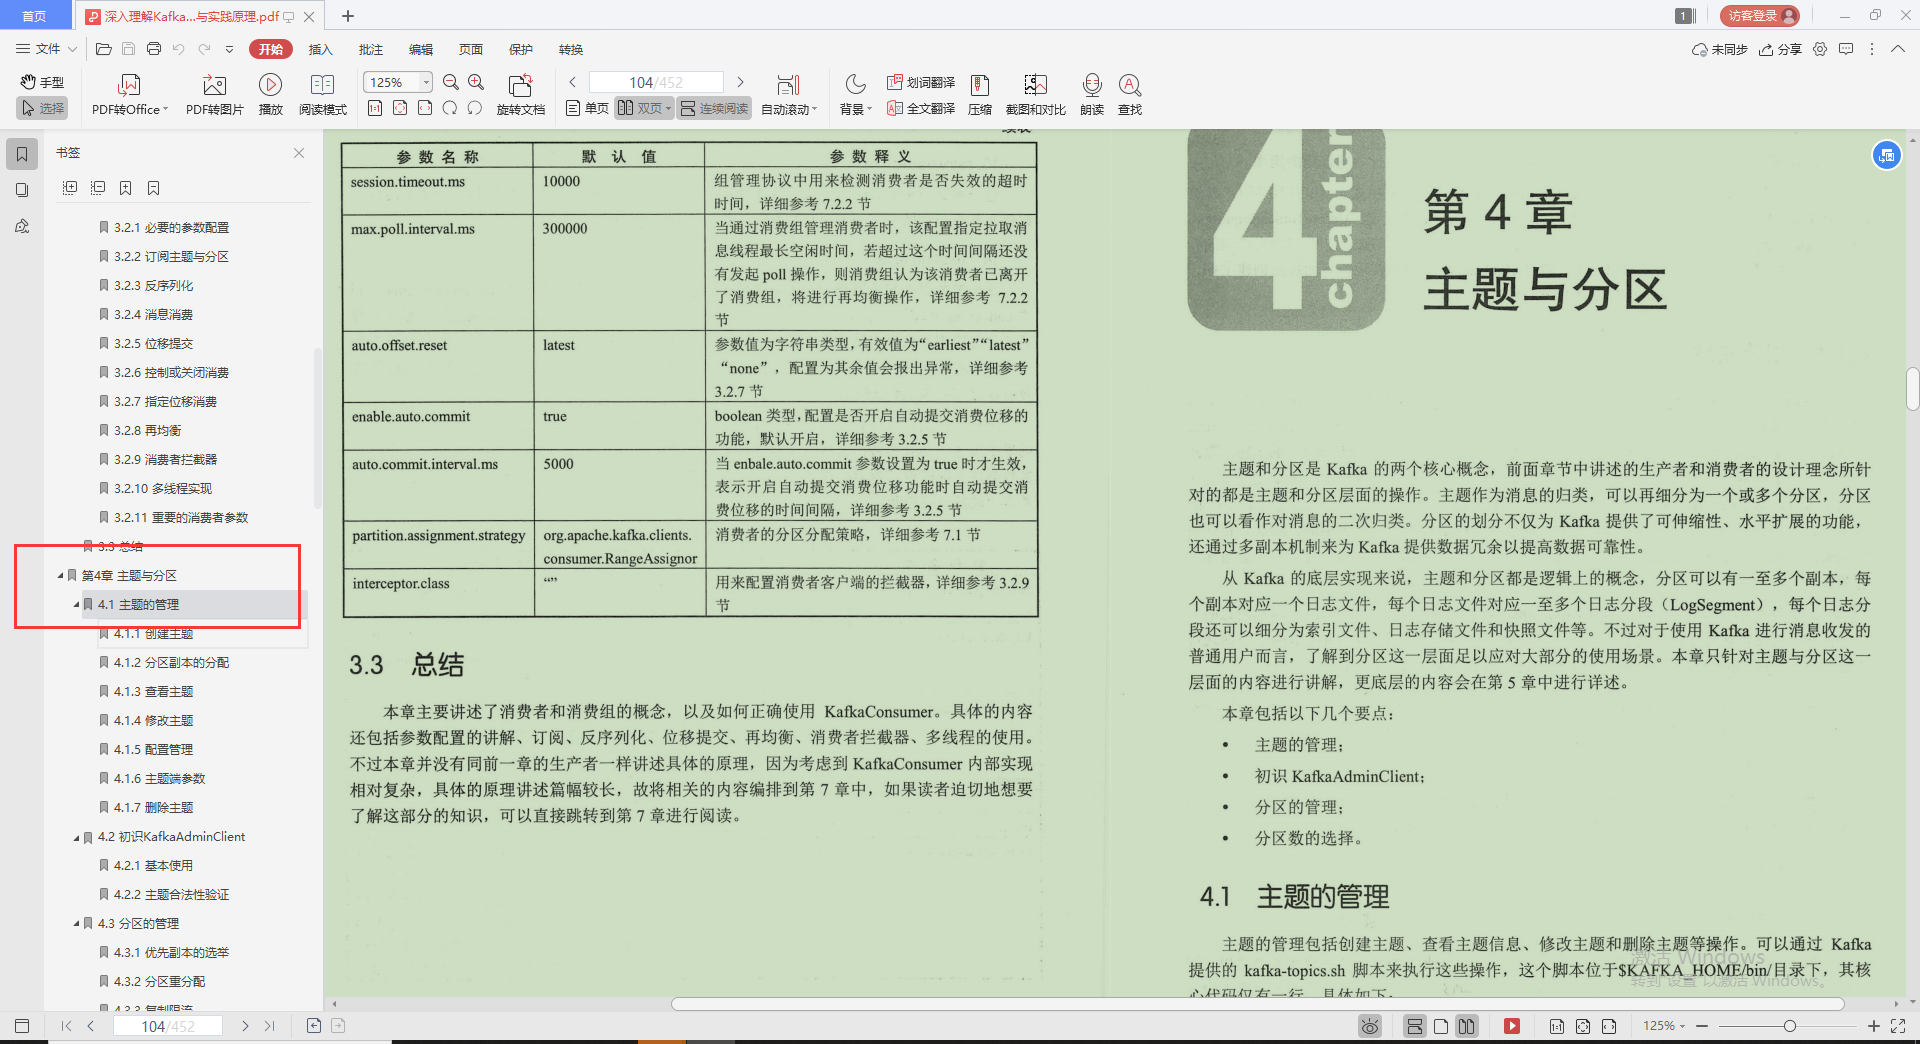 As expected to be the technical officer of Alibaba, the essence of Kafka is written in this "Limited Notes", served